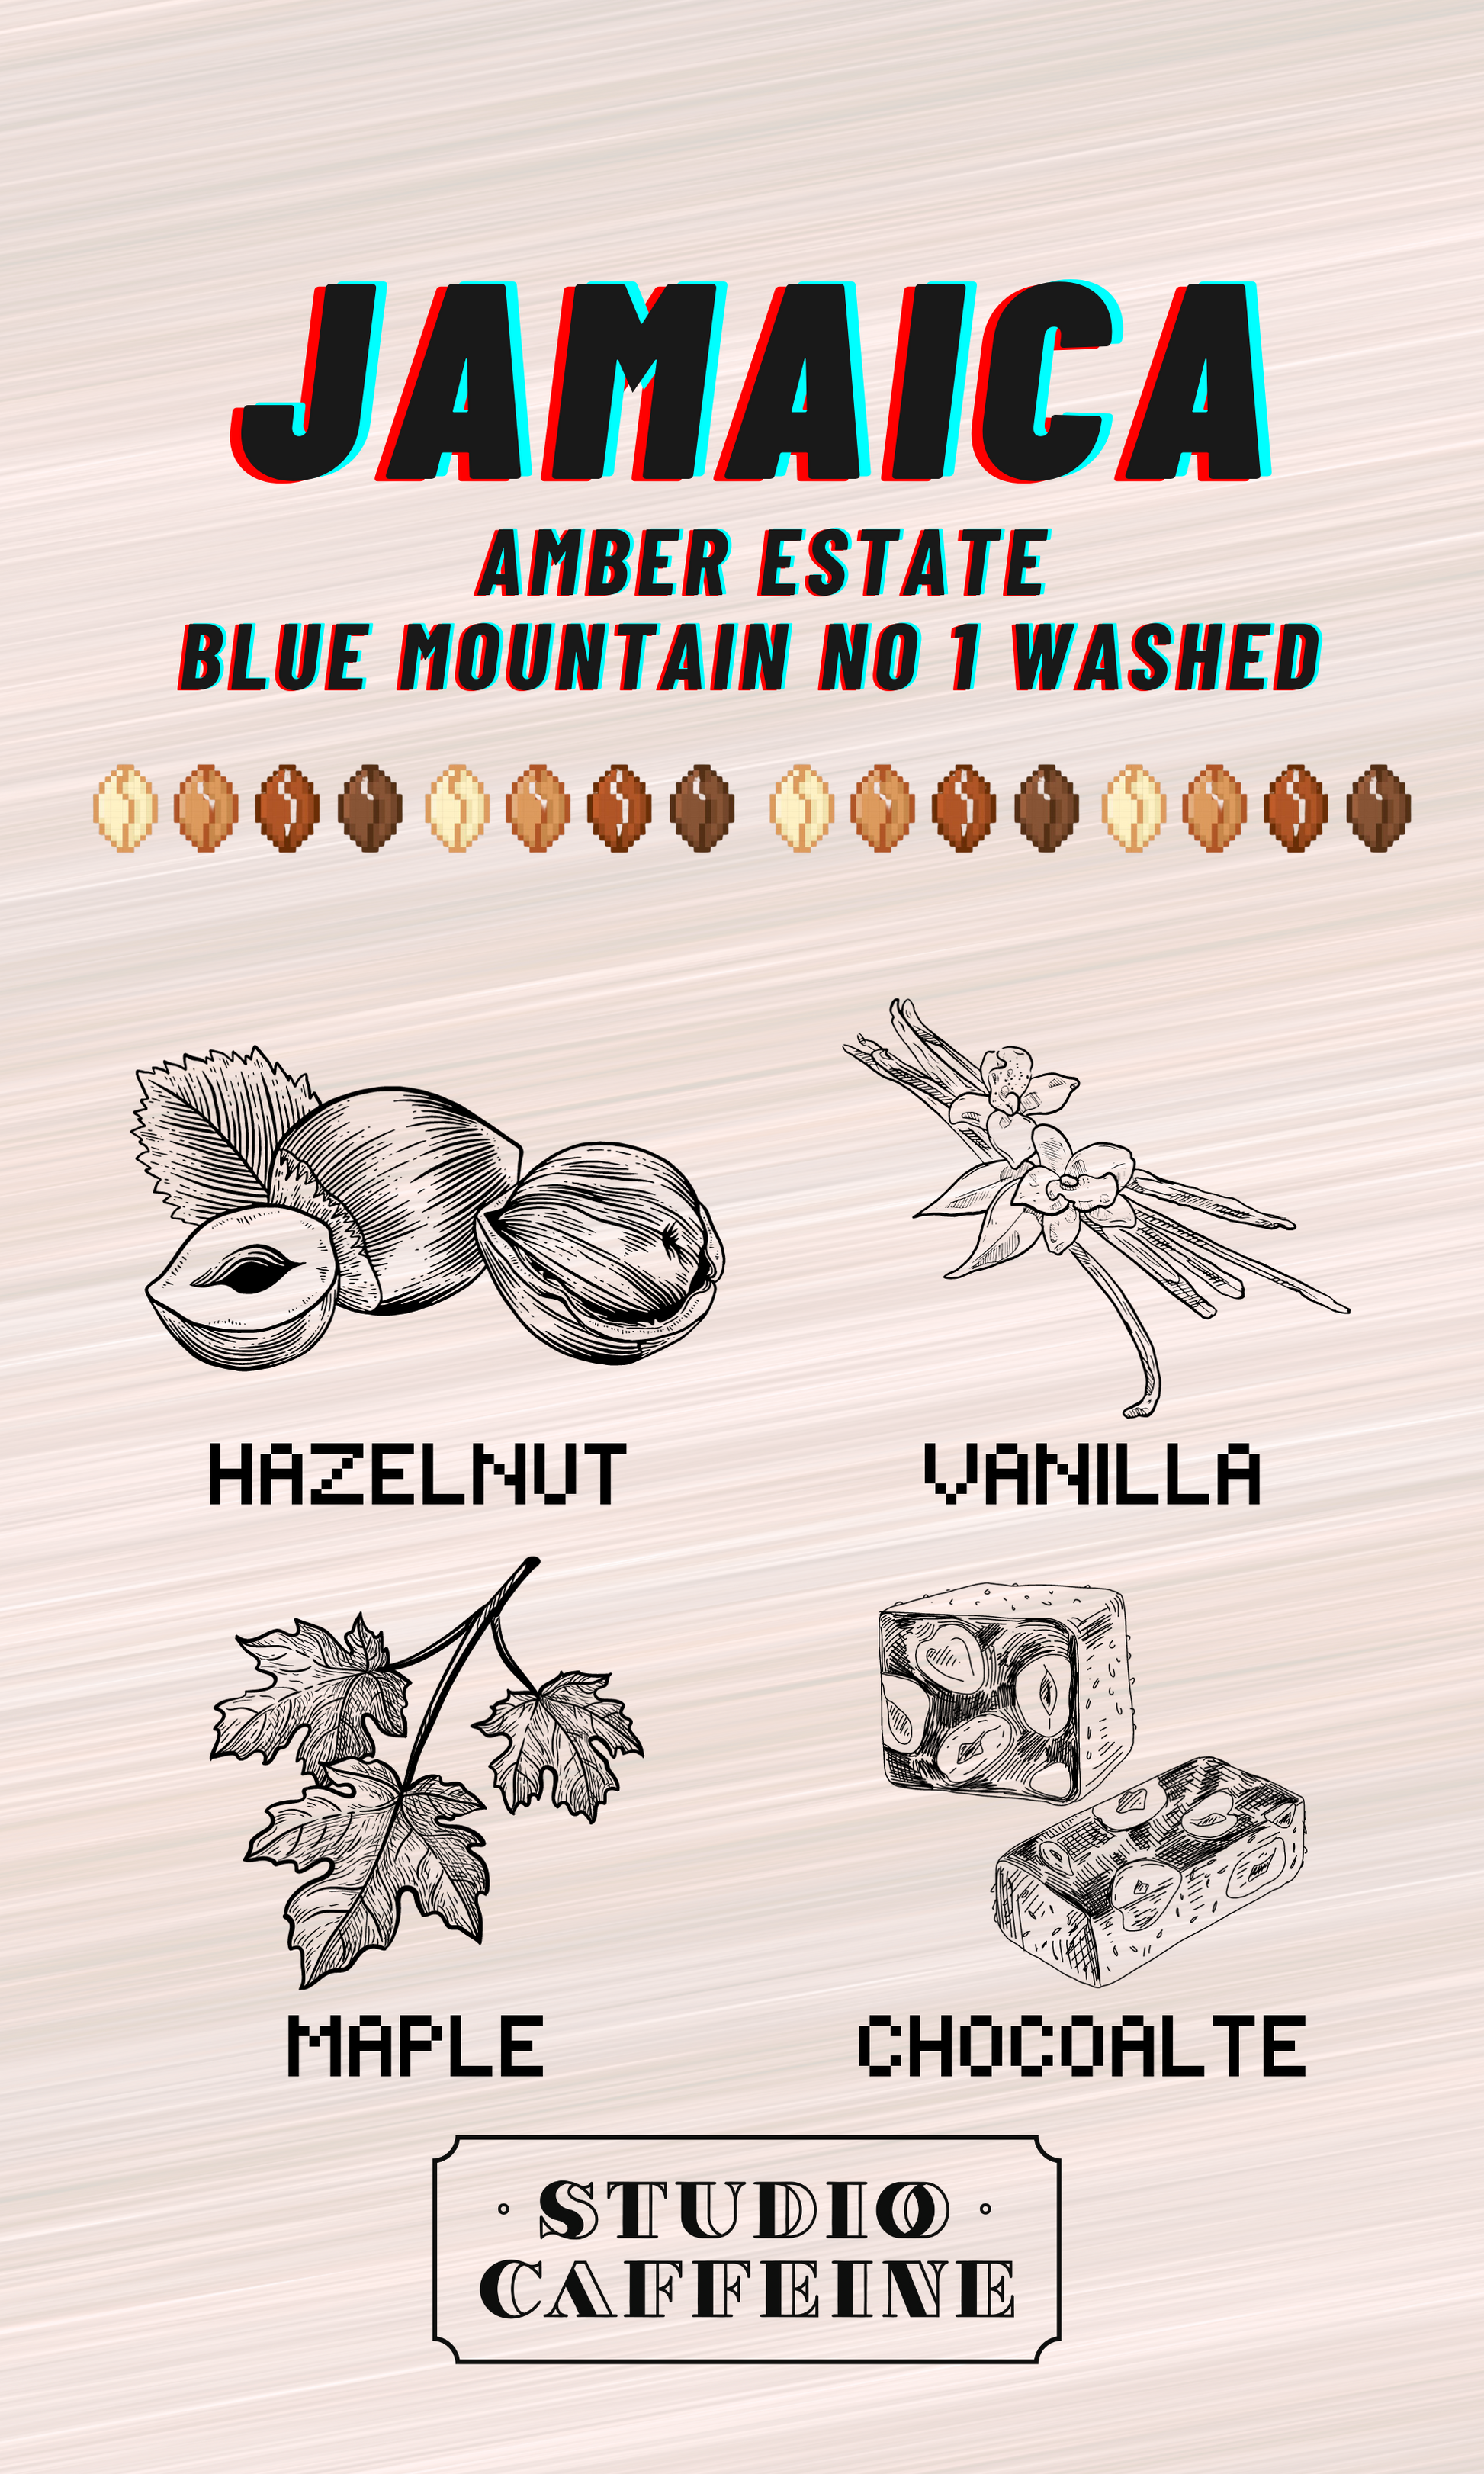 Jamica Amber Estate Blue Mountain No1 Washed coffee bean fresh roasted by Studio Caffeine